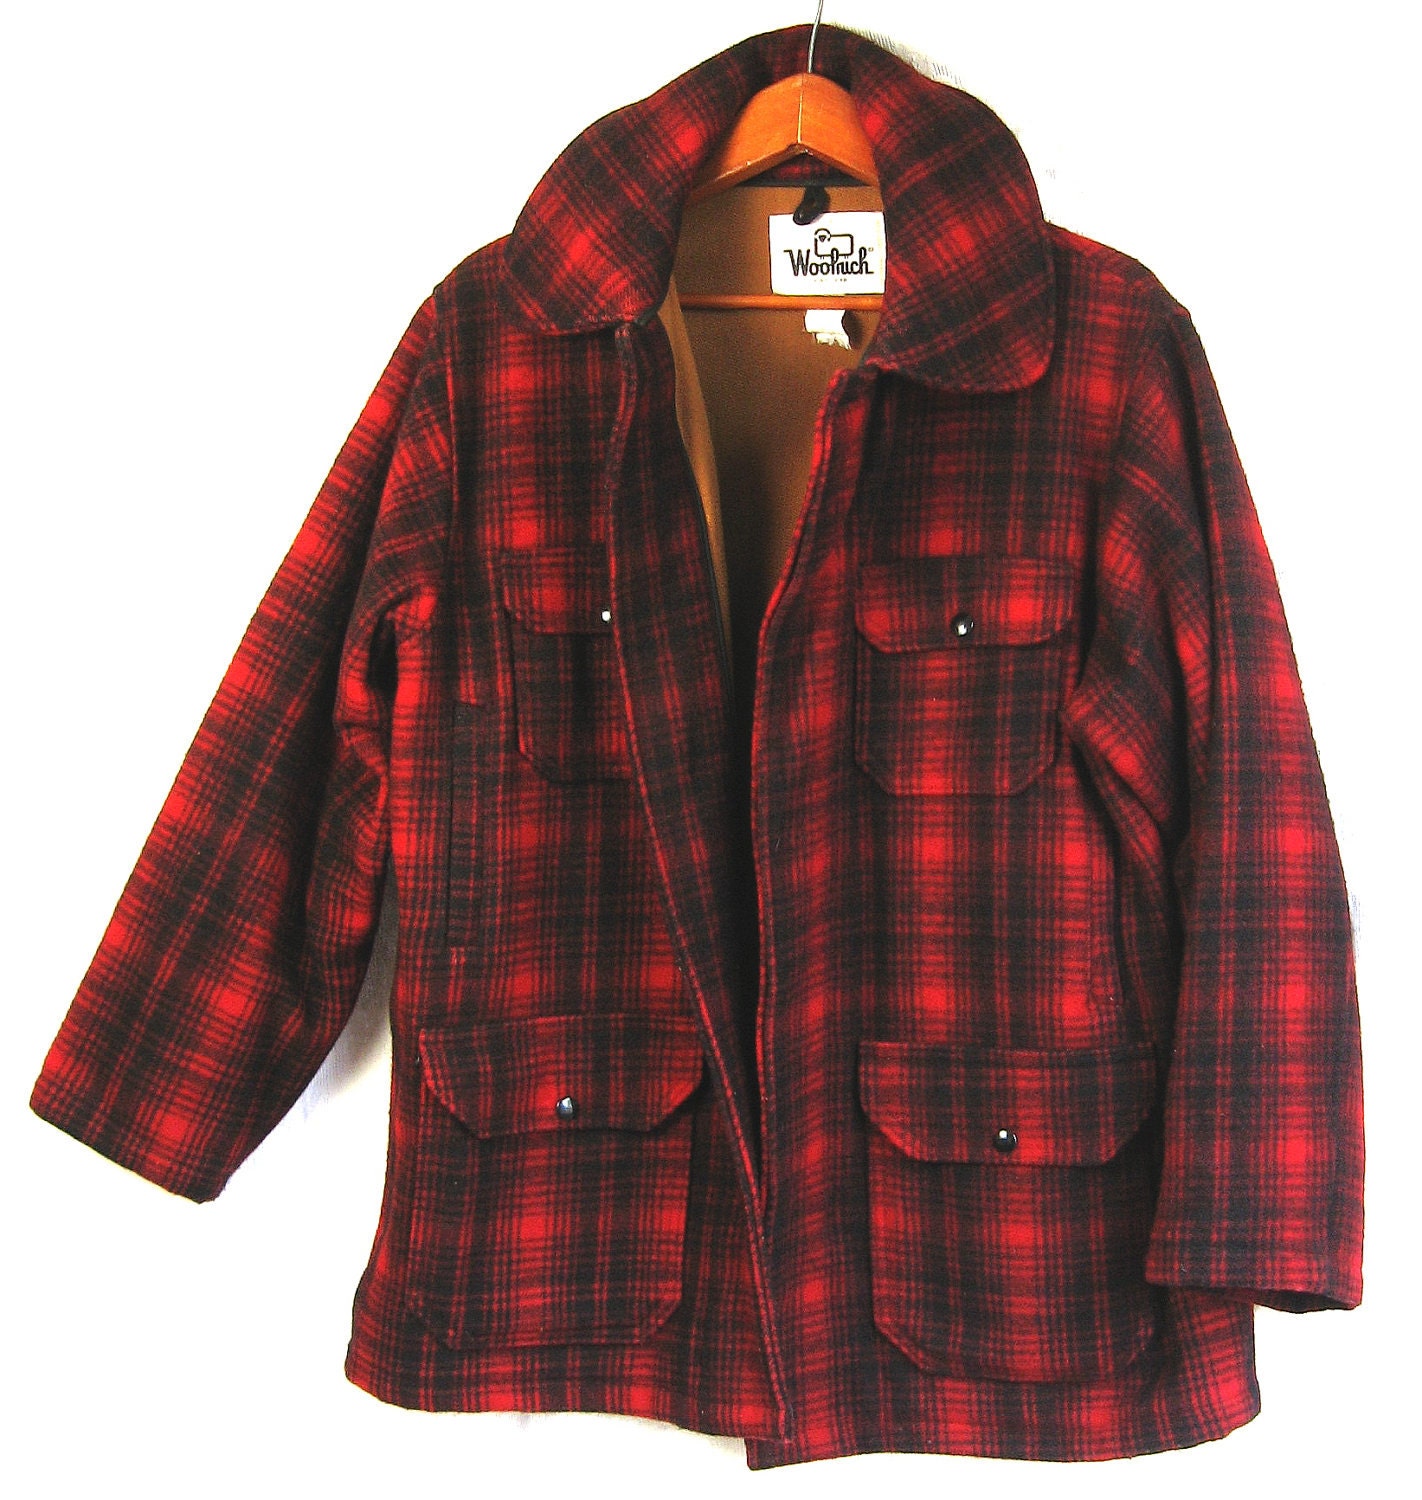 Vintage WOOLRICH Mens Plaid Coat Jacket. Red and Black Buffalo